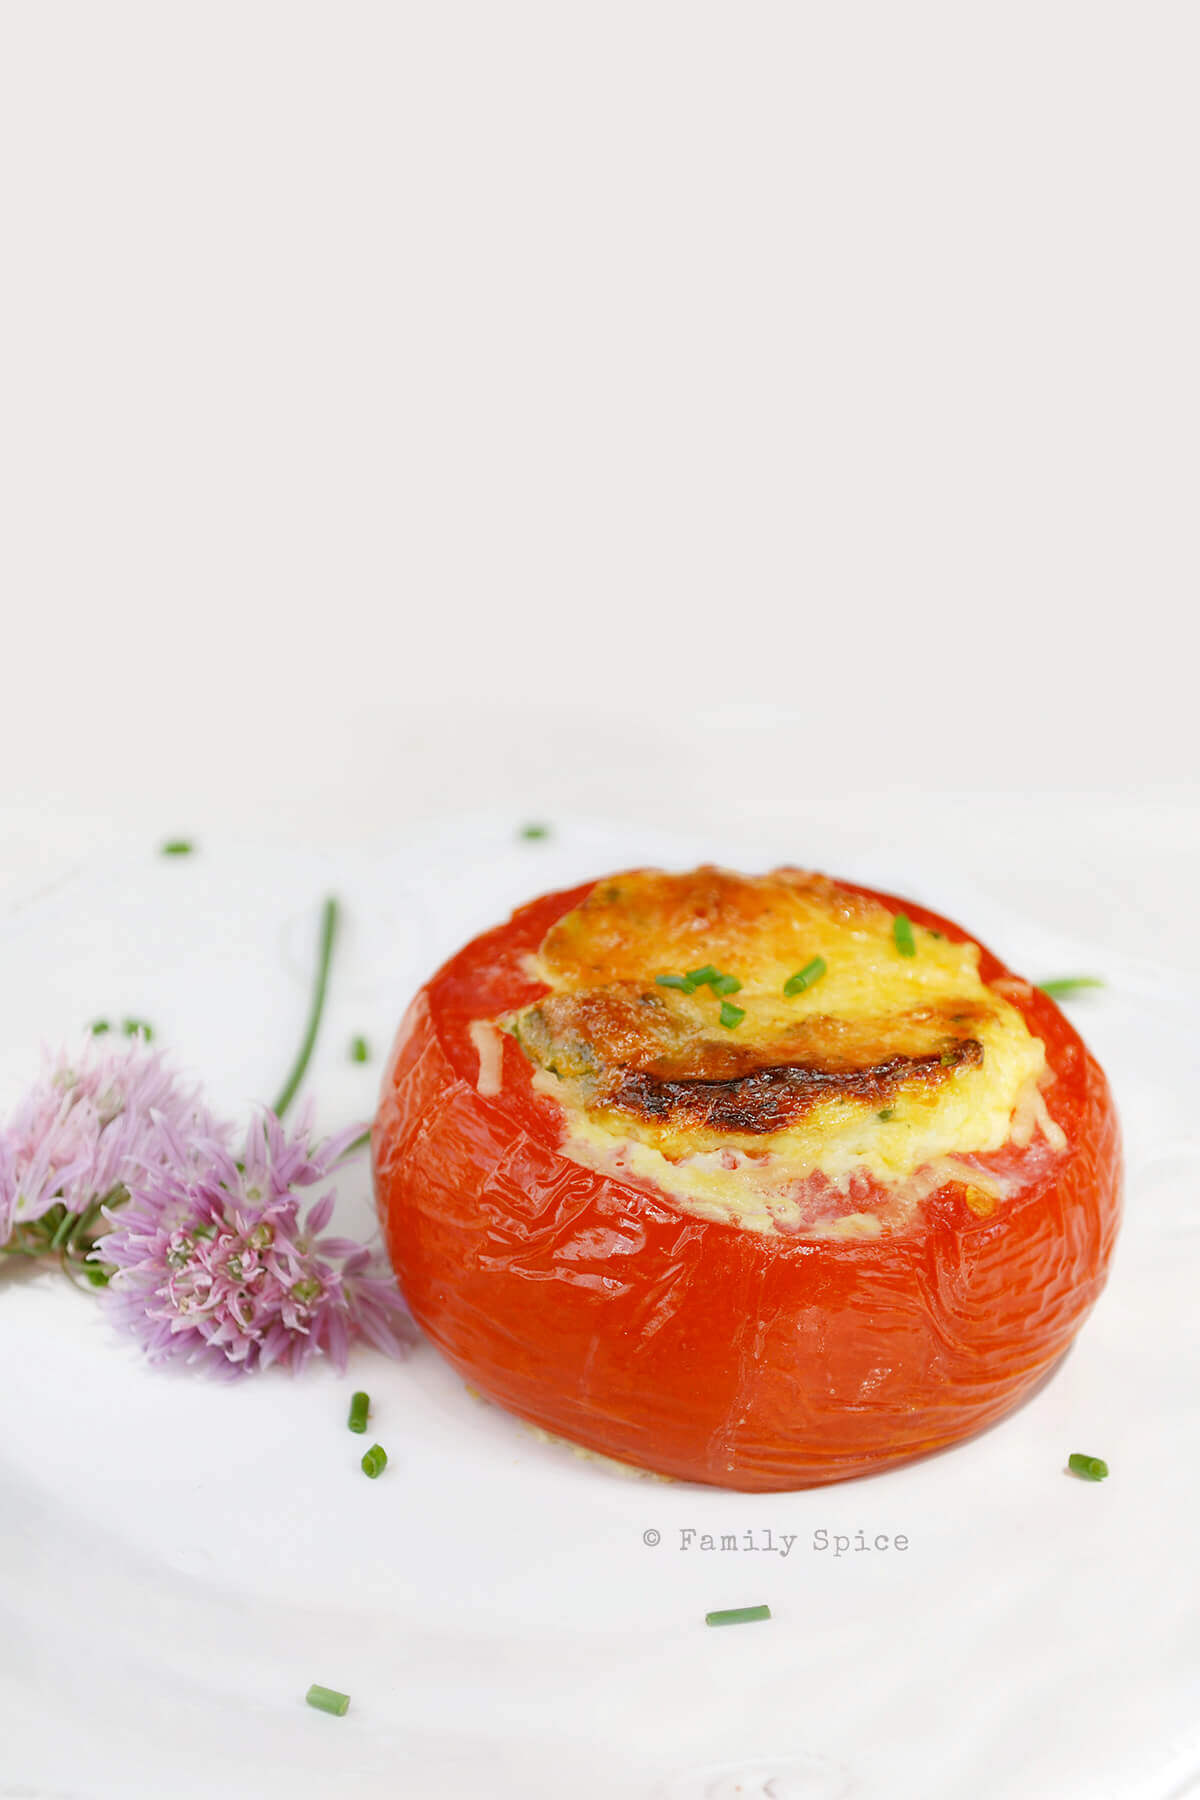 Eggs baked in whole tomatoes and topped with cheese and chives